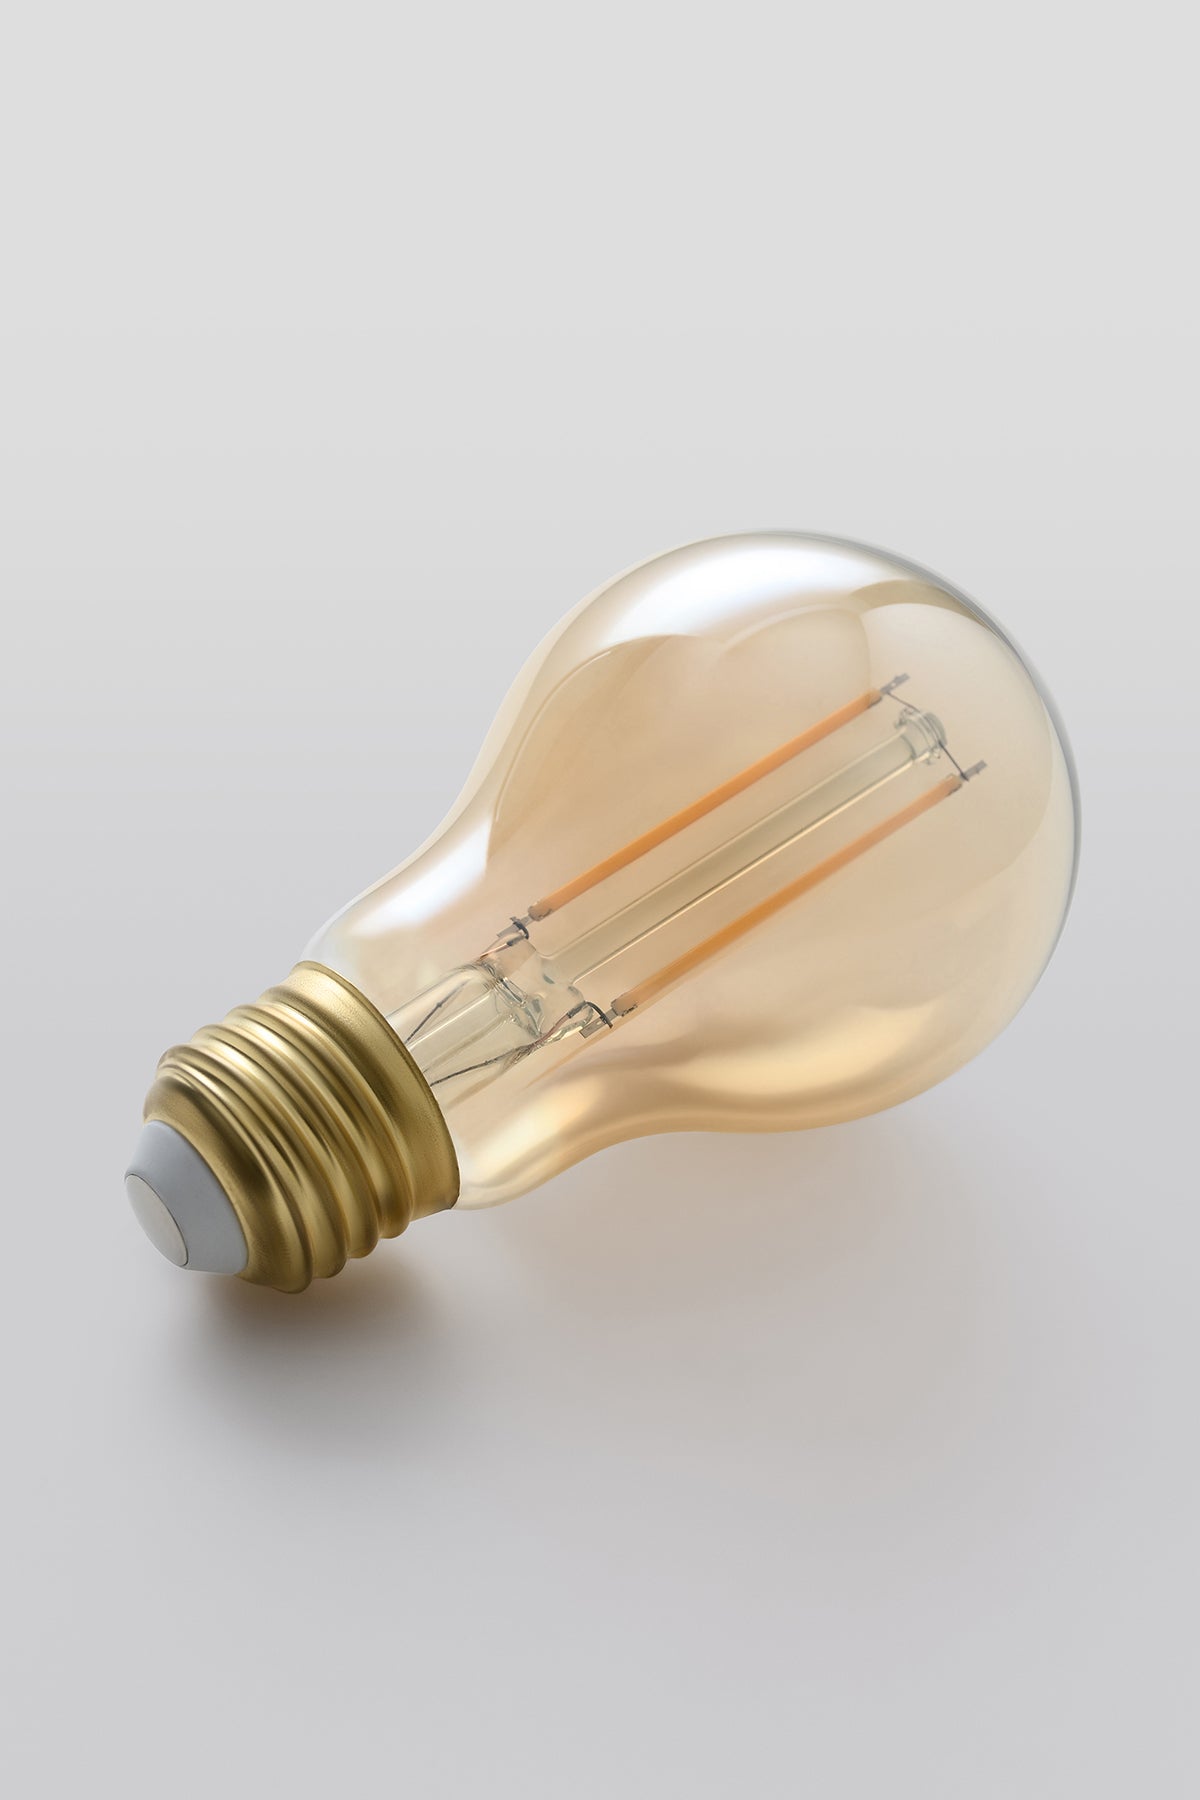 Modern A19 LED light bulb with warm vintage Edison style glow